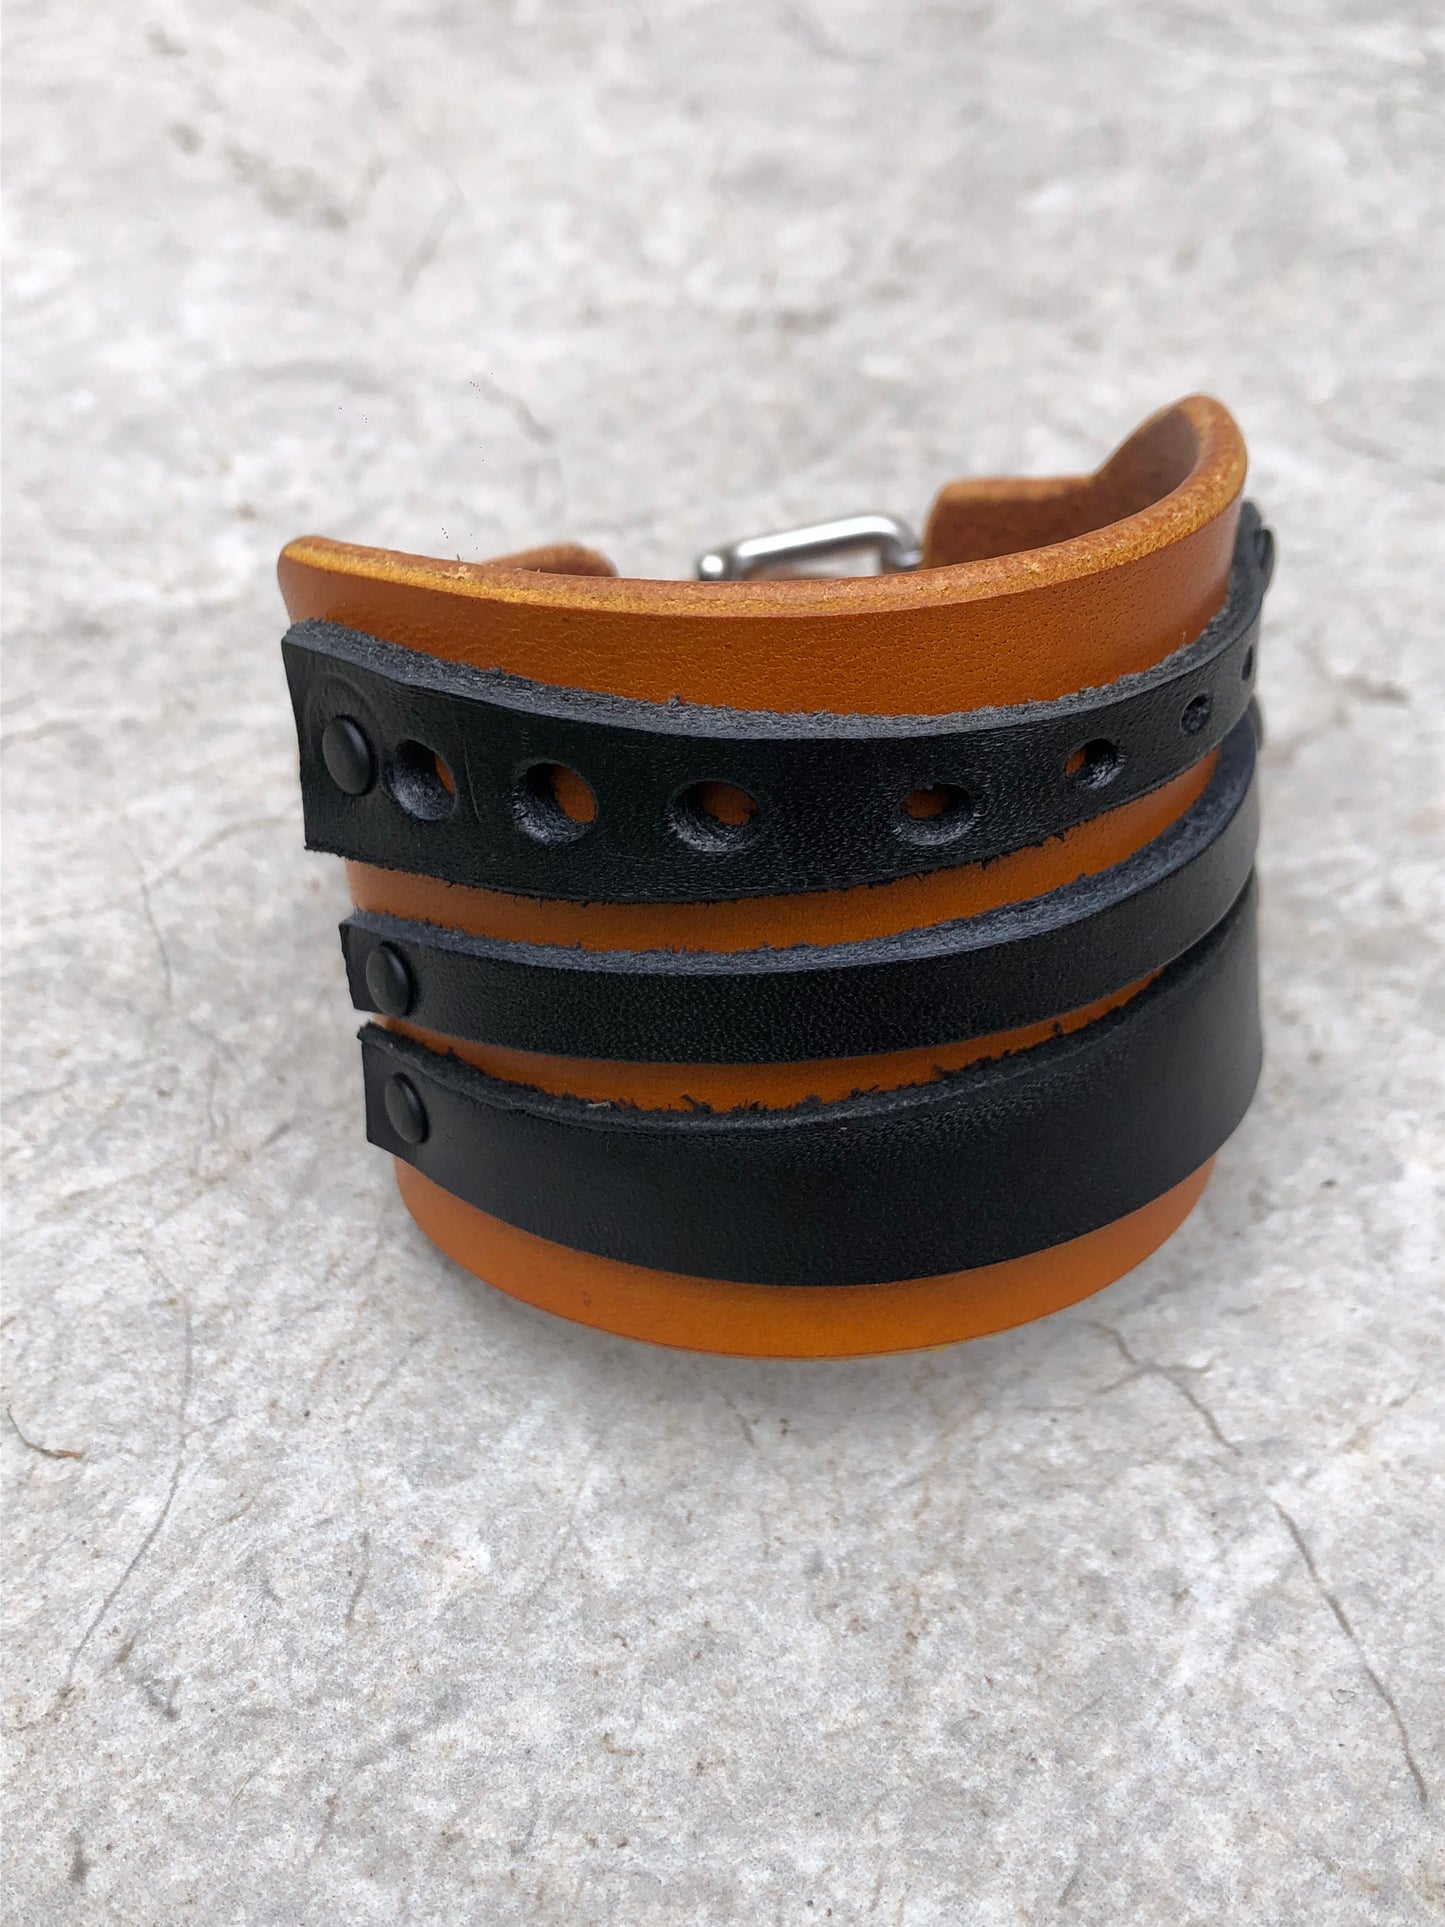 Tiger Cuff / Leather Bracelet with Adjustable Buckle